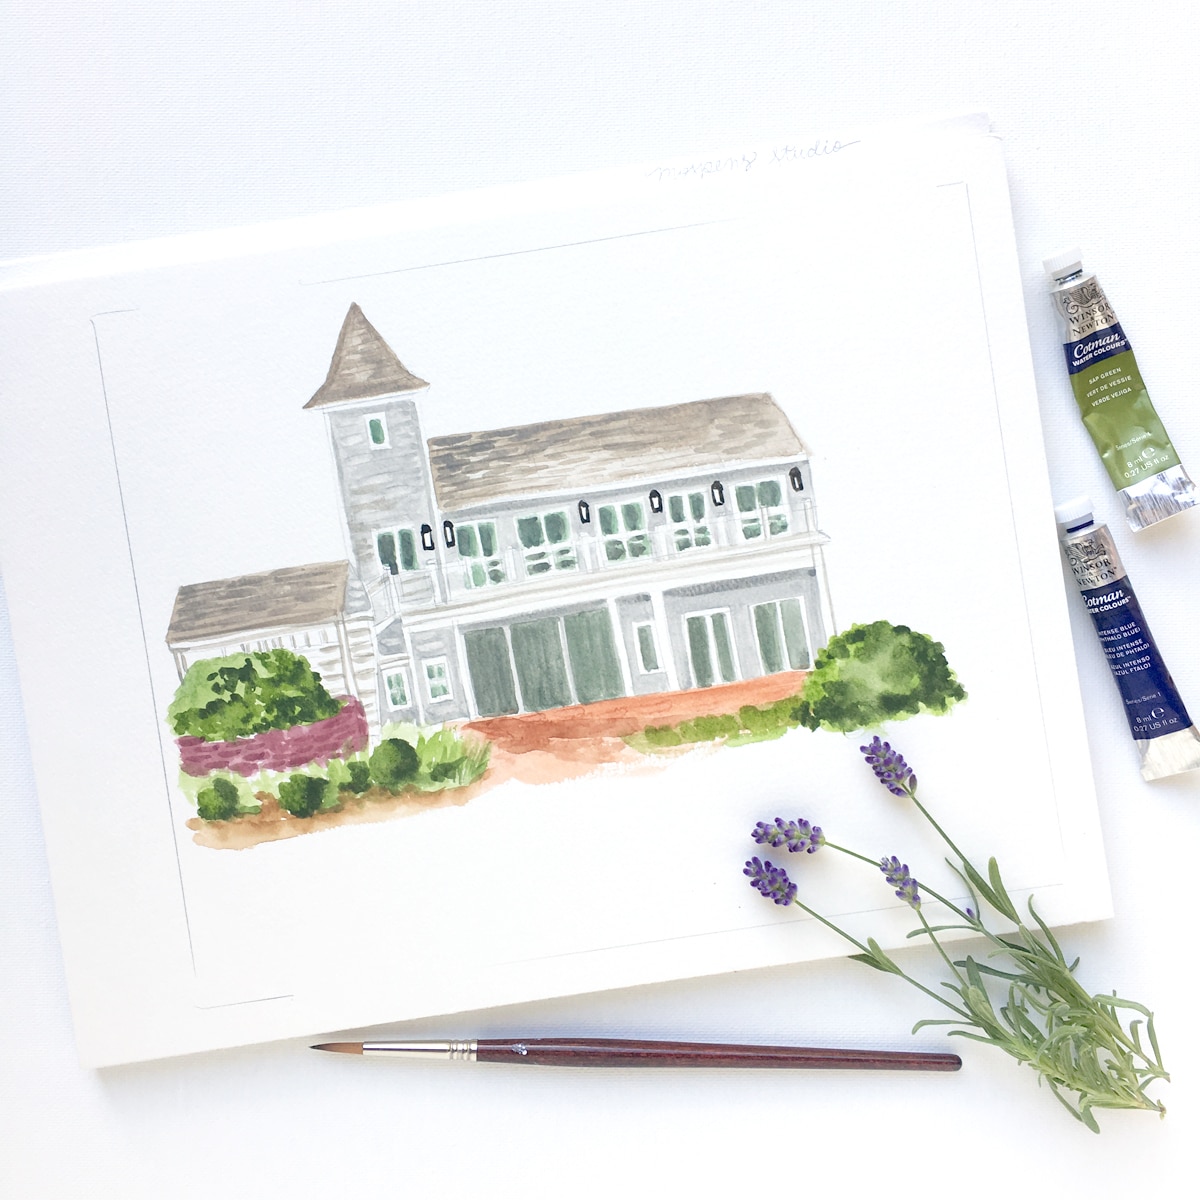 Hand-painted venue illustration art by artist Michelle Mospens. Perfect for your wedding venue invitations. - Mospens Studio